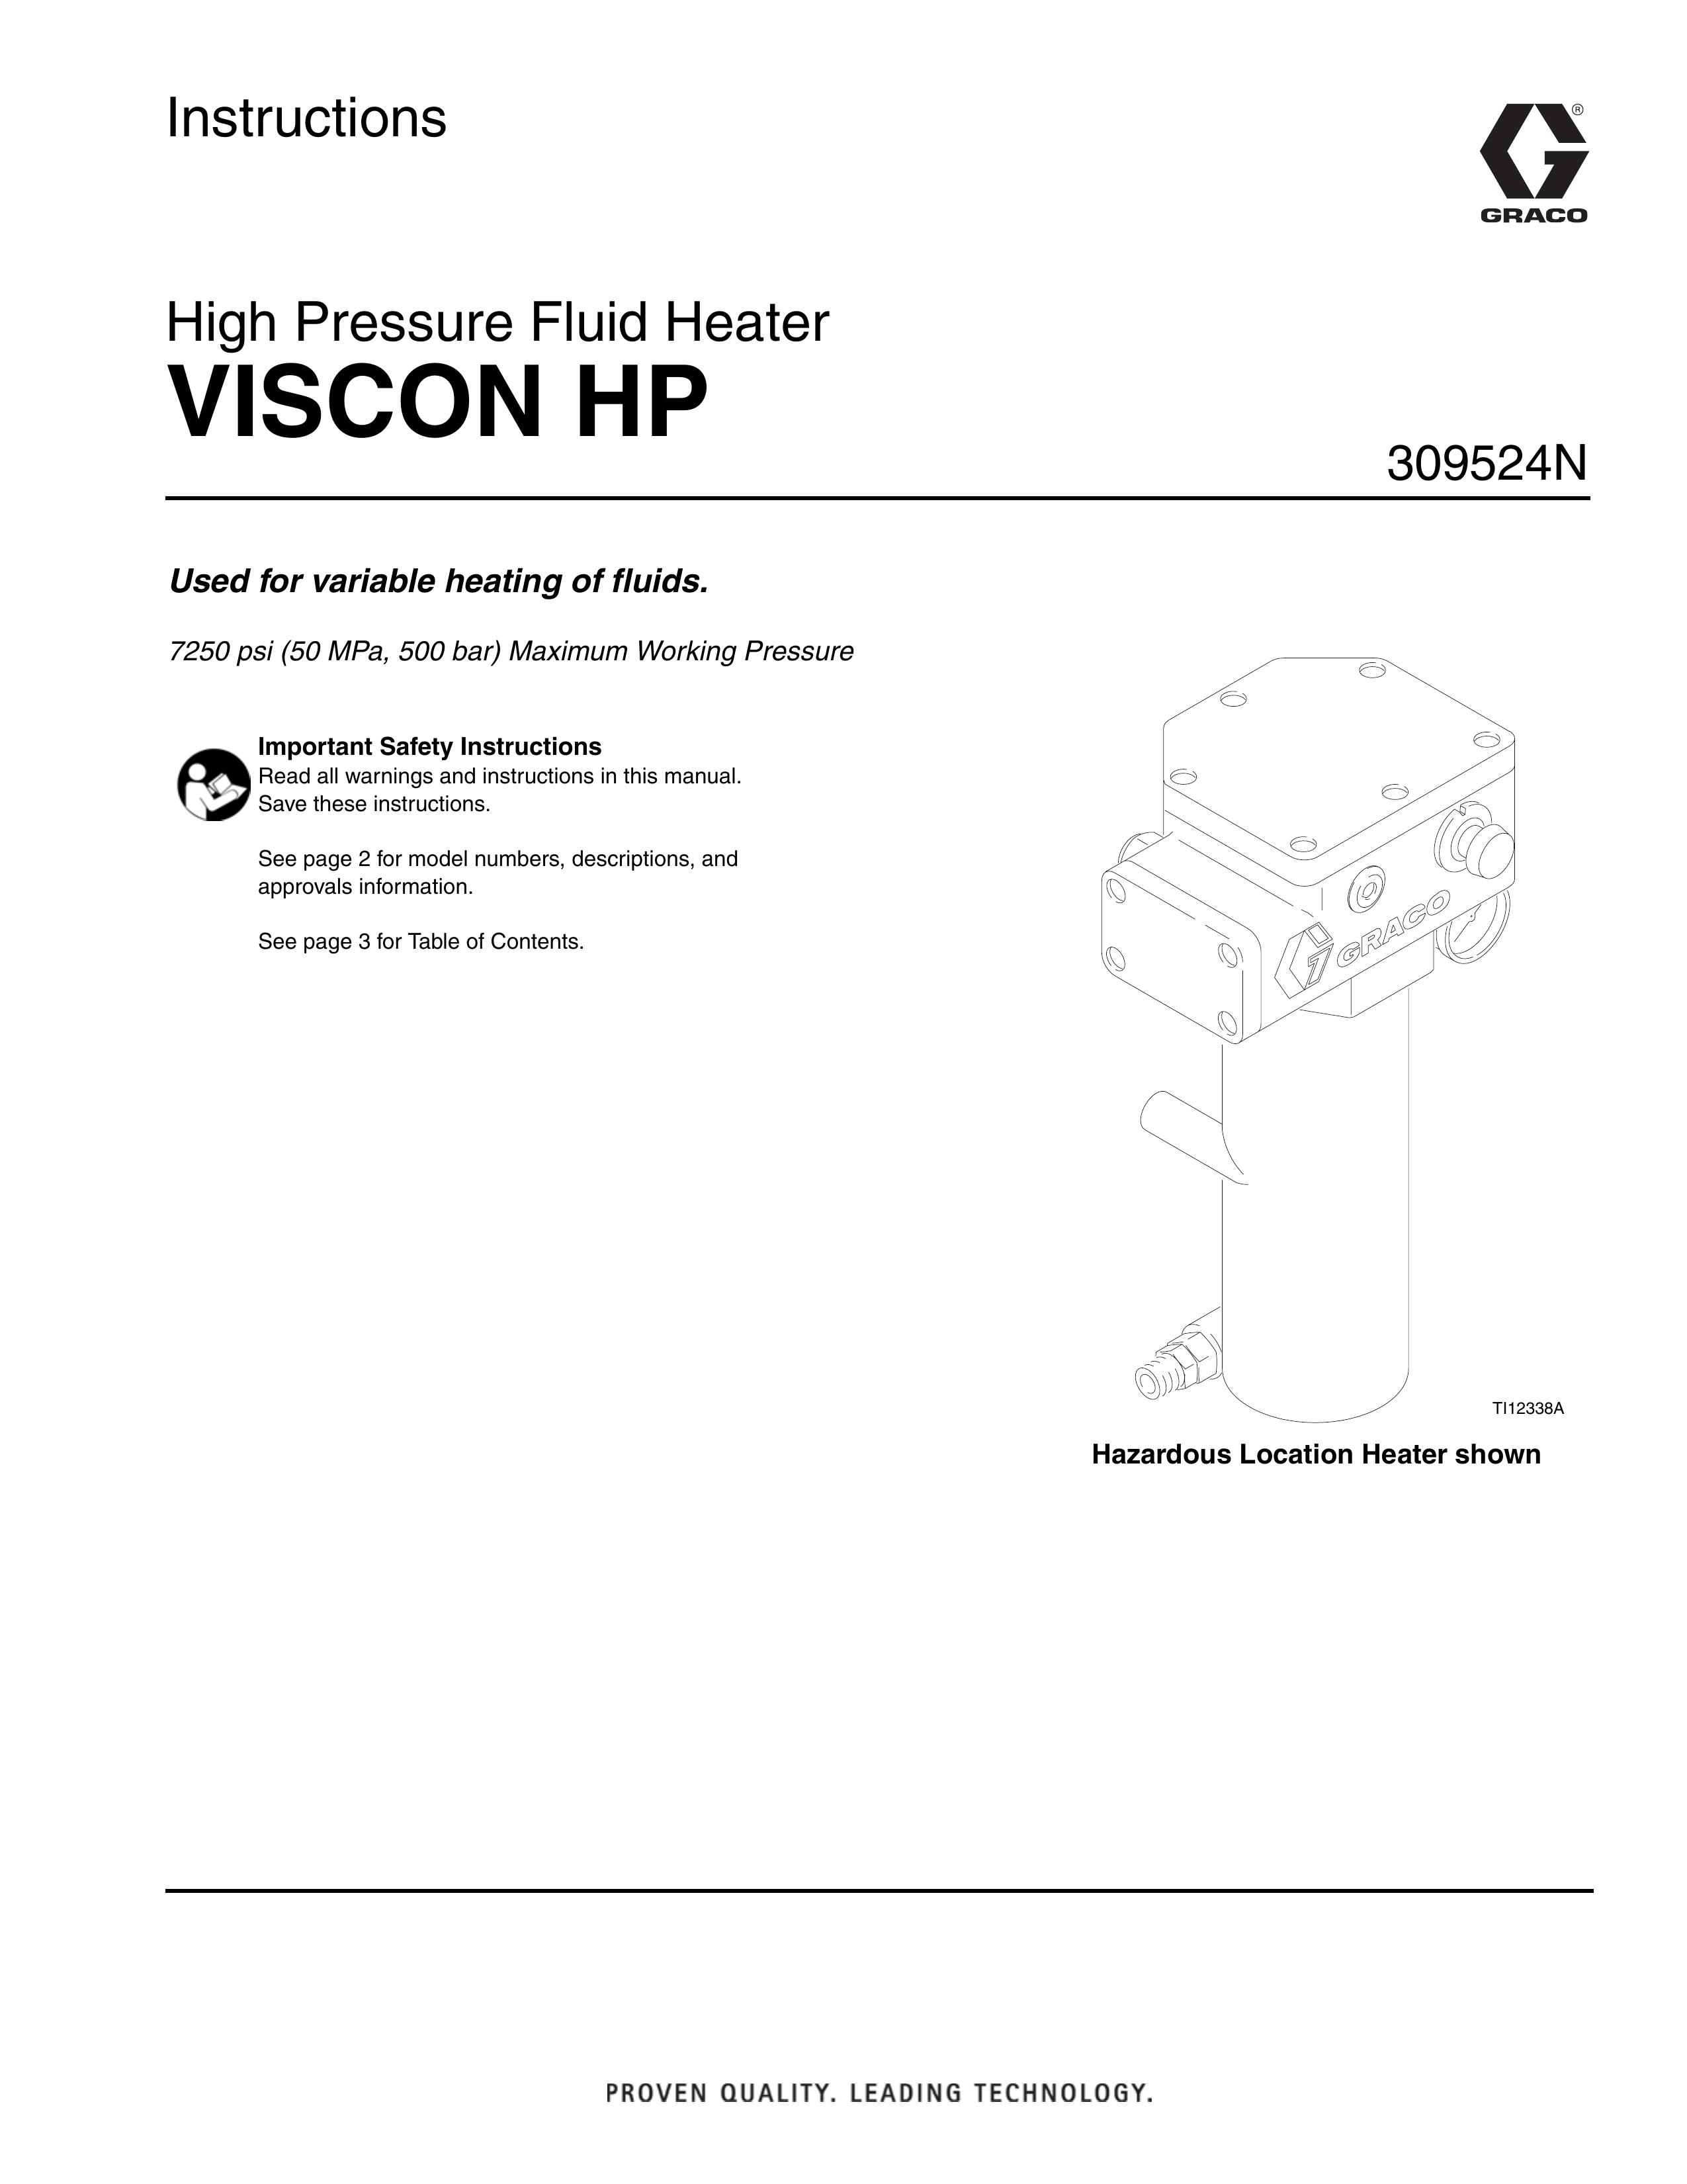 Graco 309524N Marine Heating System User Manual (Page 1)